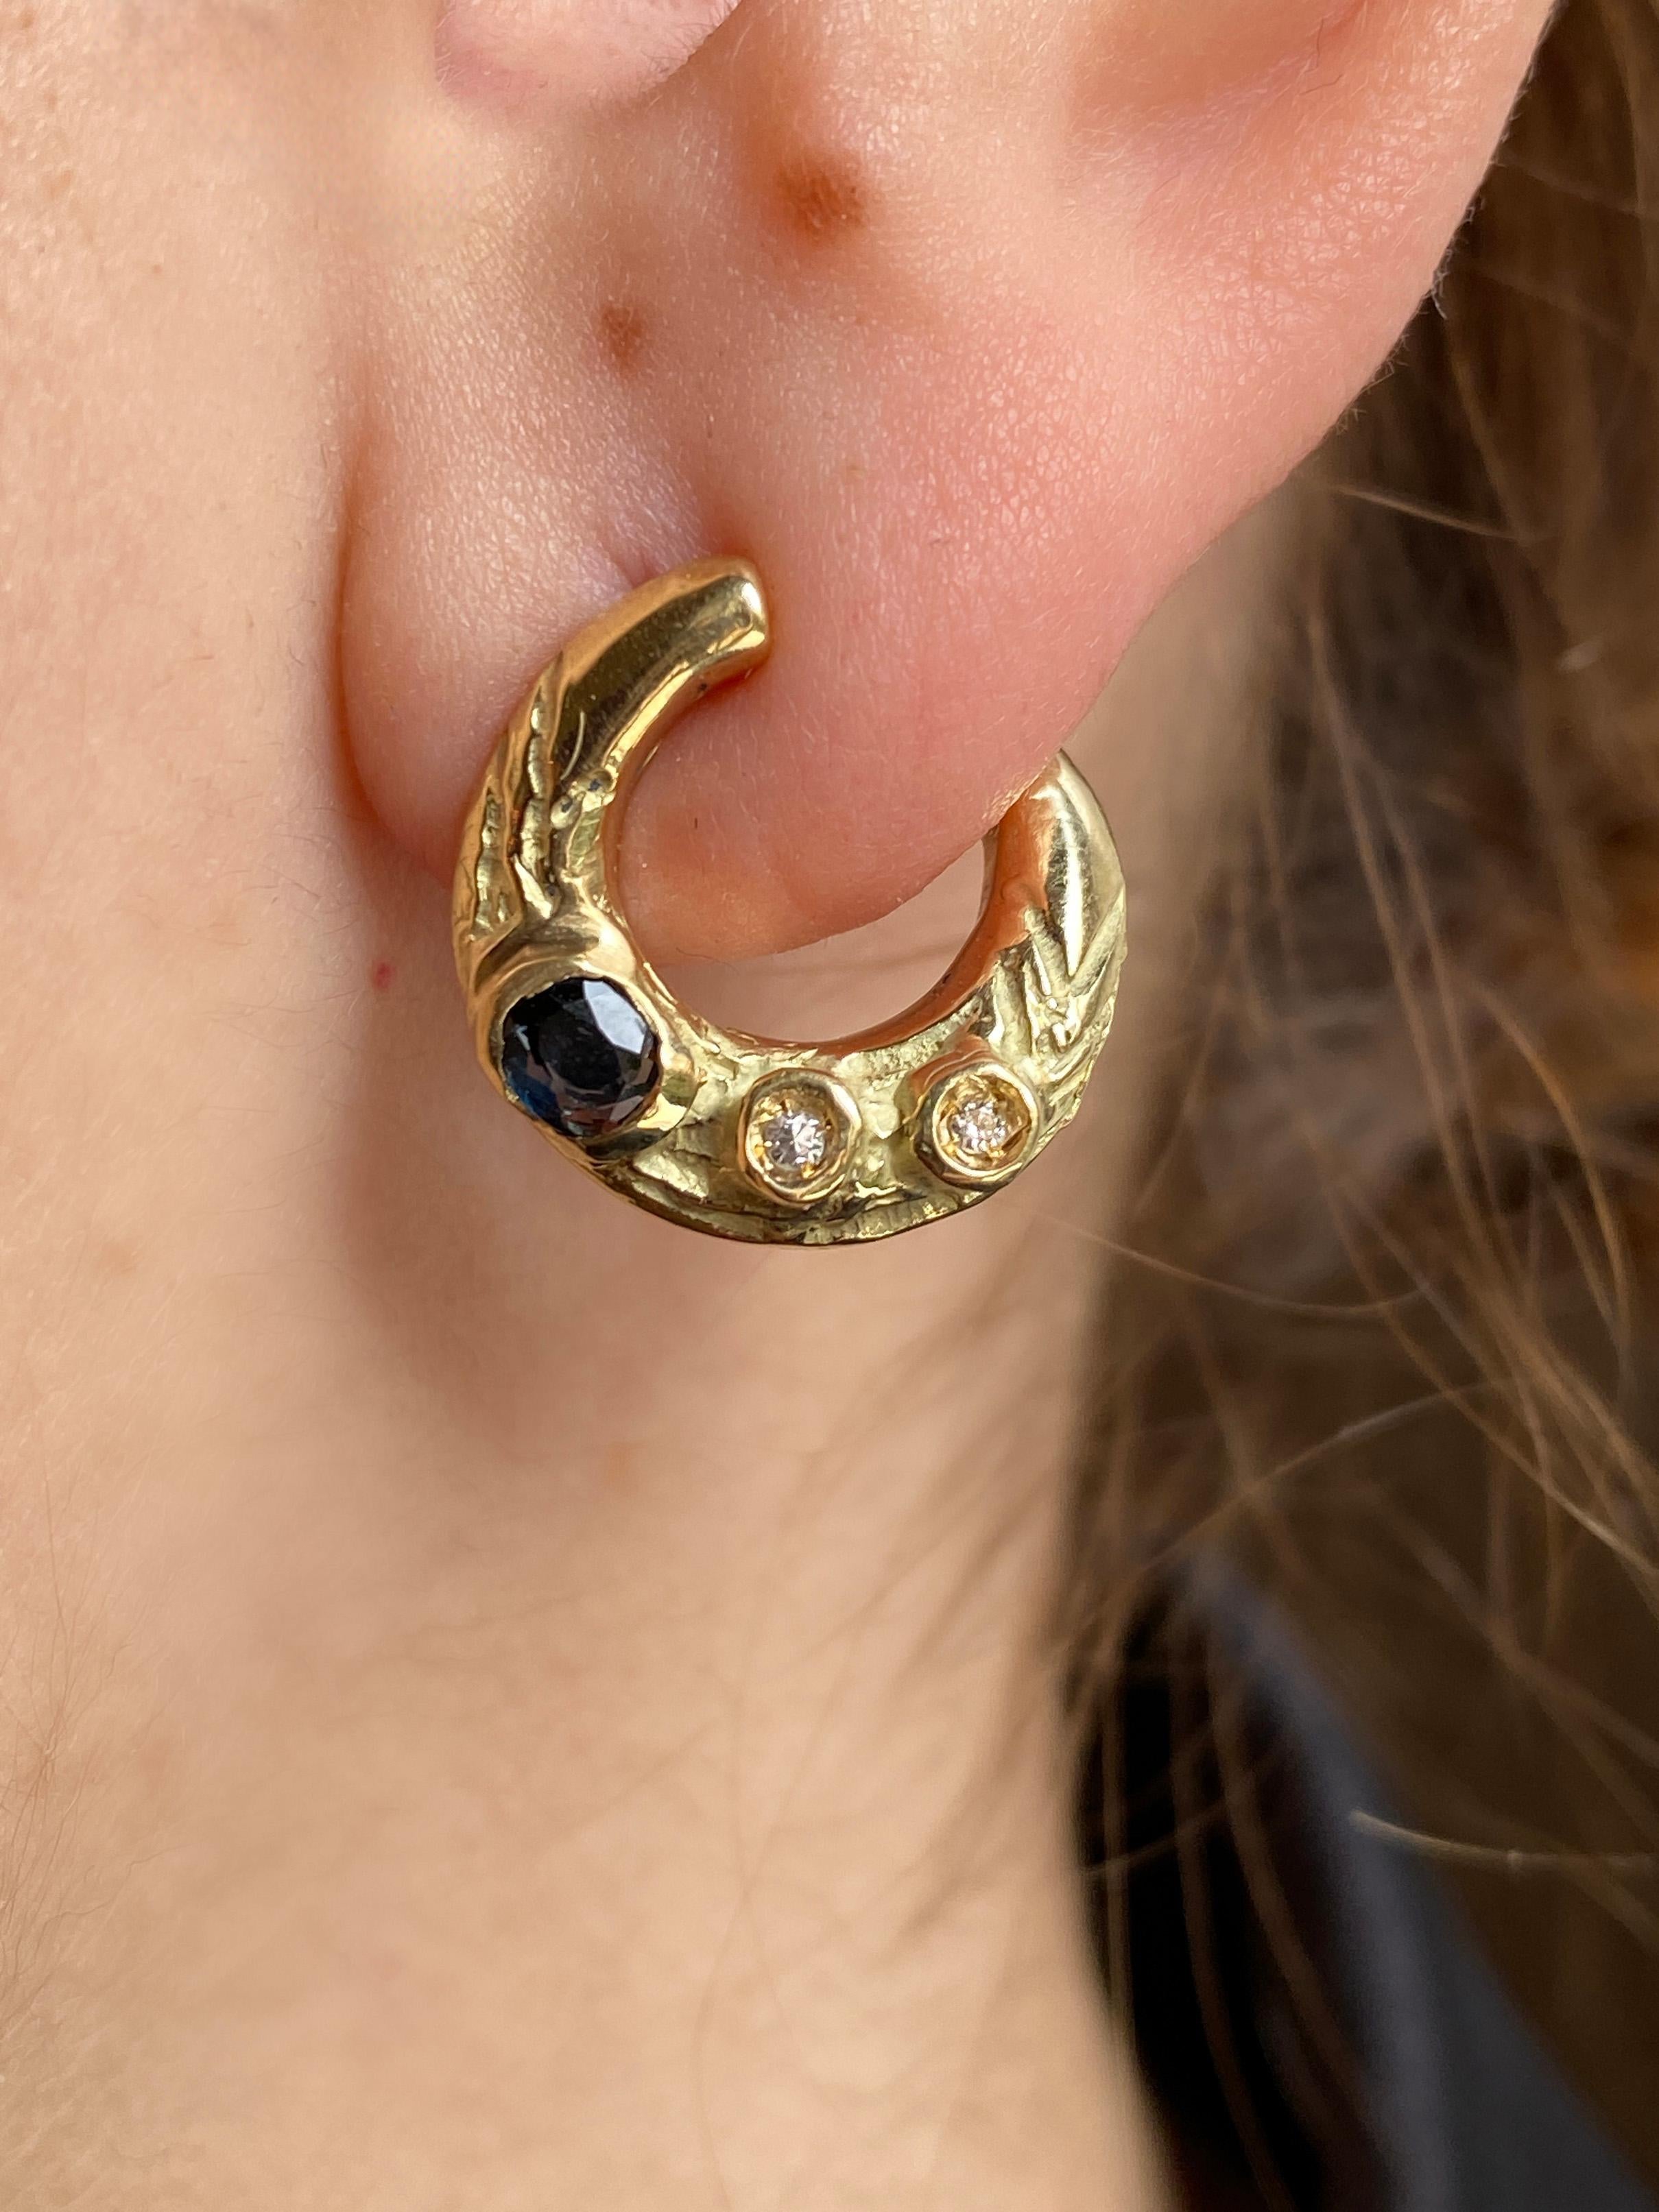 Rossella Ugolini stunning 18K Yellow Gold earrings, meticulously handcrafted in Italy. These exquisite pieces feature an open circle design reminiscent of a half Moon, delicately resting on the lobe with effortless elegance. Designed for both right